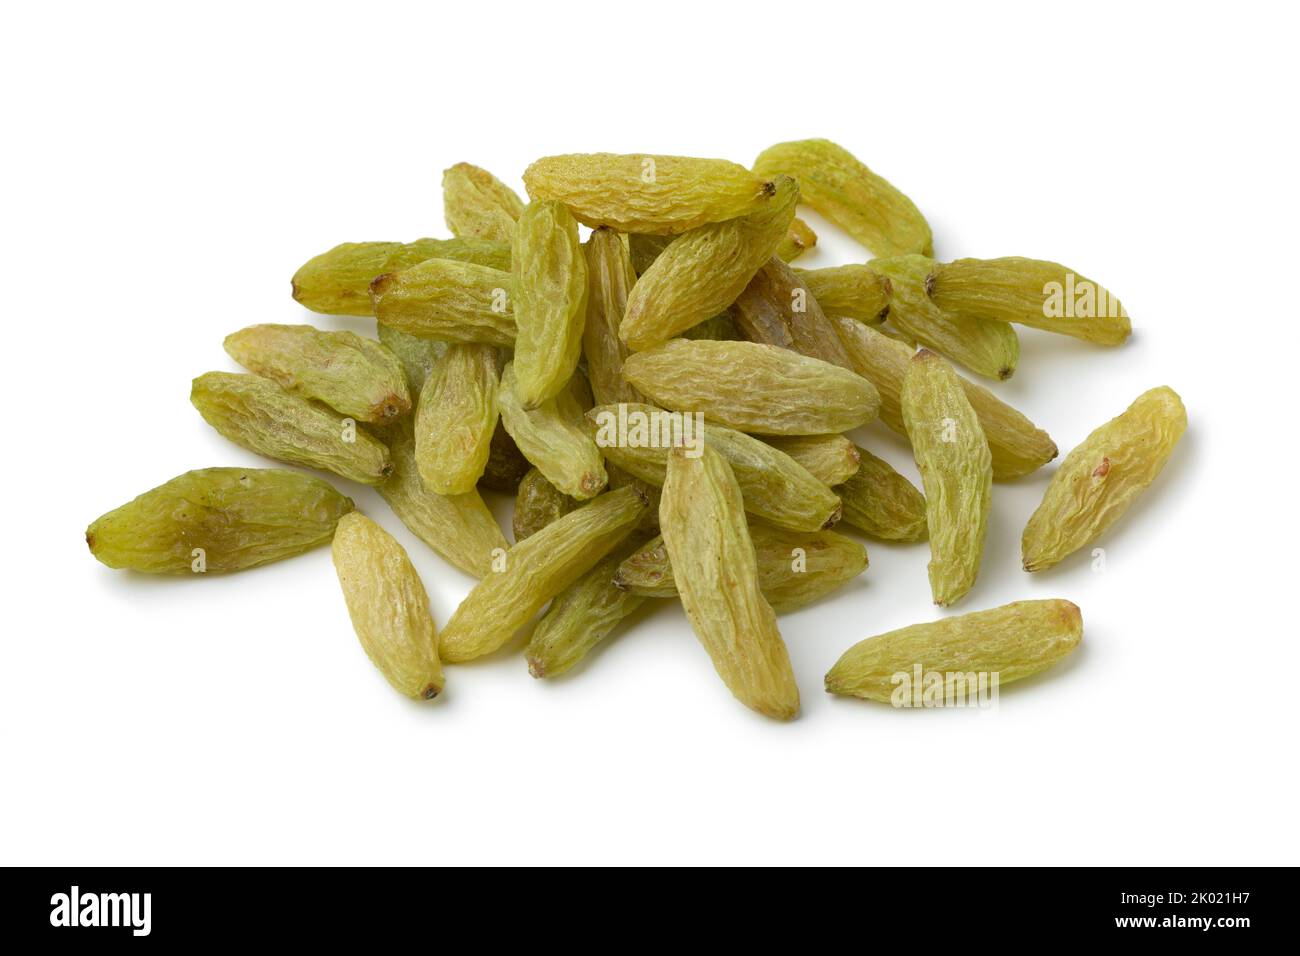 Heap of green Afghans raisins close up isolated on white background Stock Photo